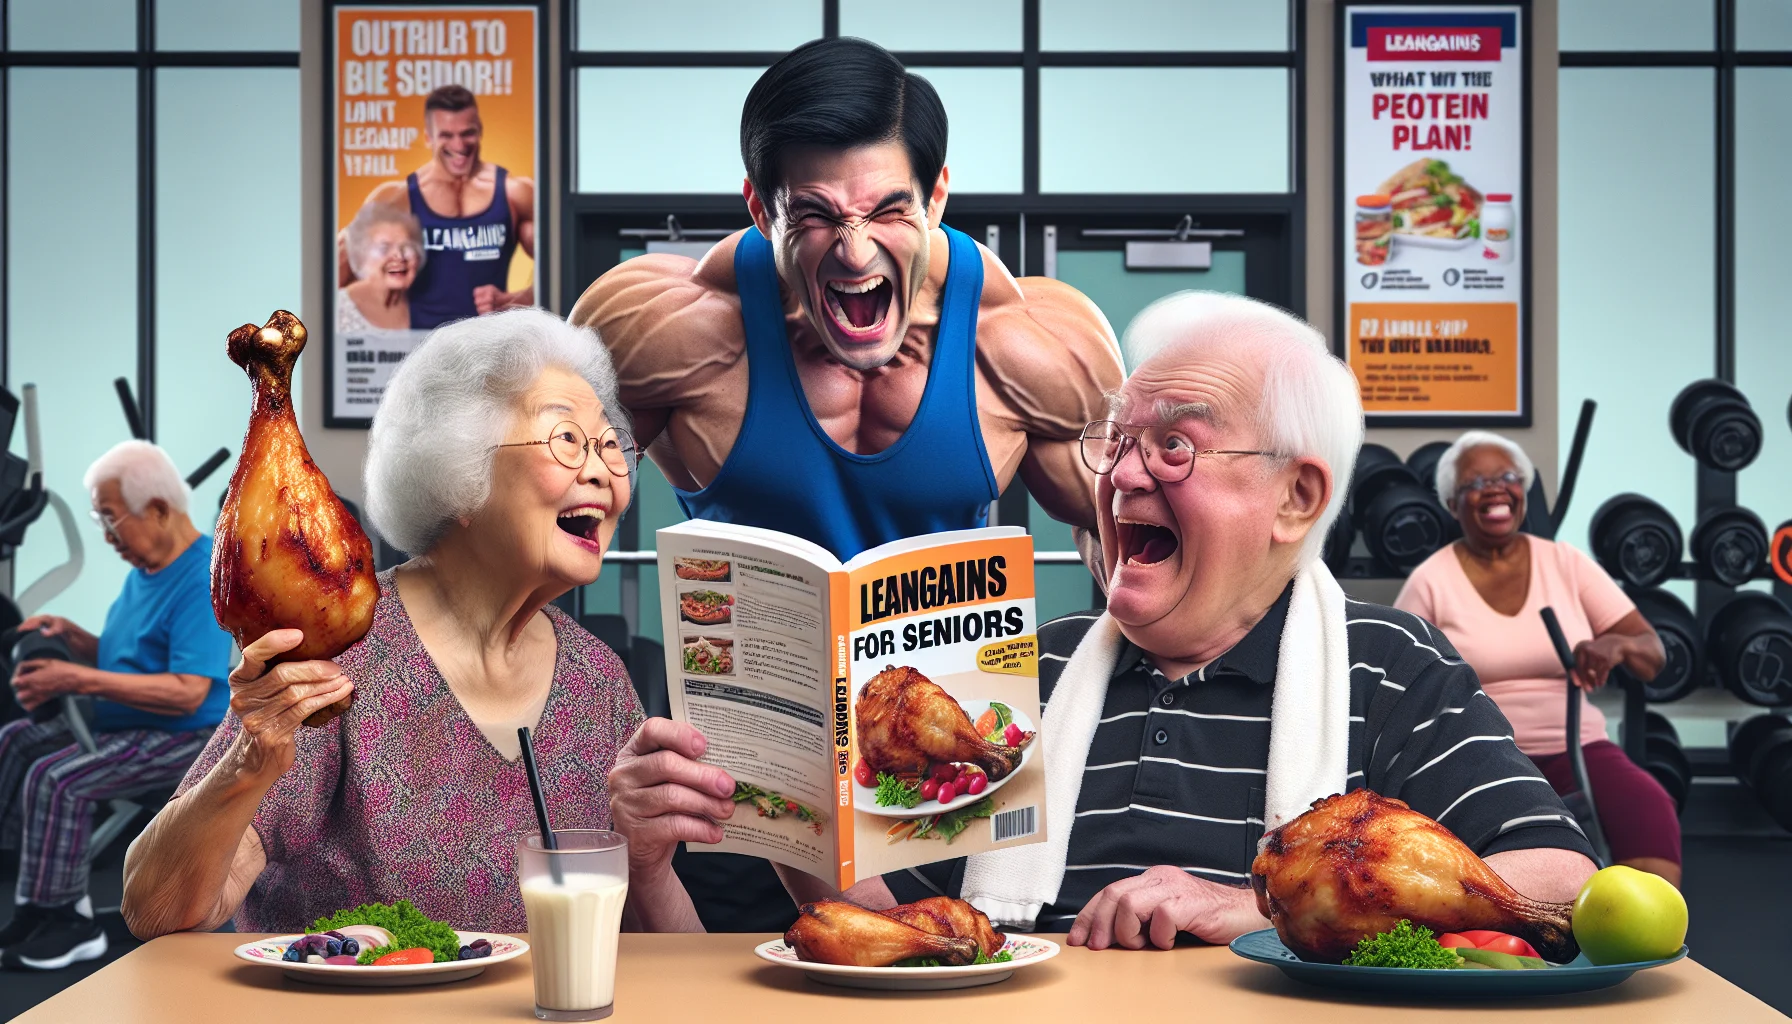 Generate a humorous, realistic scene featuring elderly people engaging with the Leangains diet plan. In this scenario, an Asian elderly woman is reading a recipe book titled 'Leangains for Seniors', while a Caucasian elderly man misinterprets the plan by attempting to lift an overly large chicken drumstick as if it is a weight. A black elderly woman looks on, laughing heartily as she sips on a protein shake. The backdrop is a lively seniors' fitness center, with fitness equipment and a poster advocating a healthy diet.